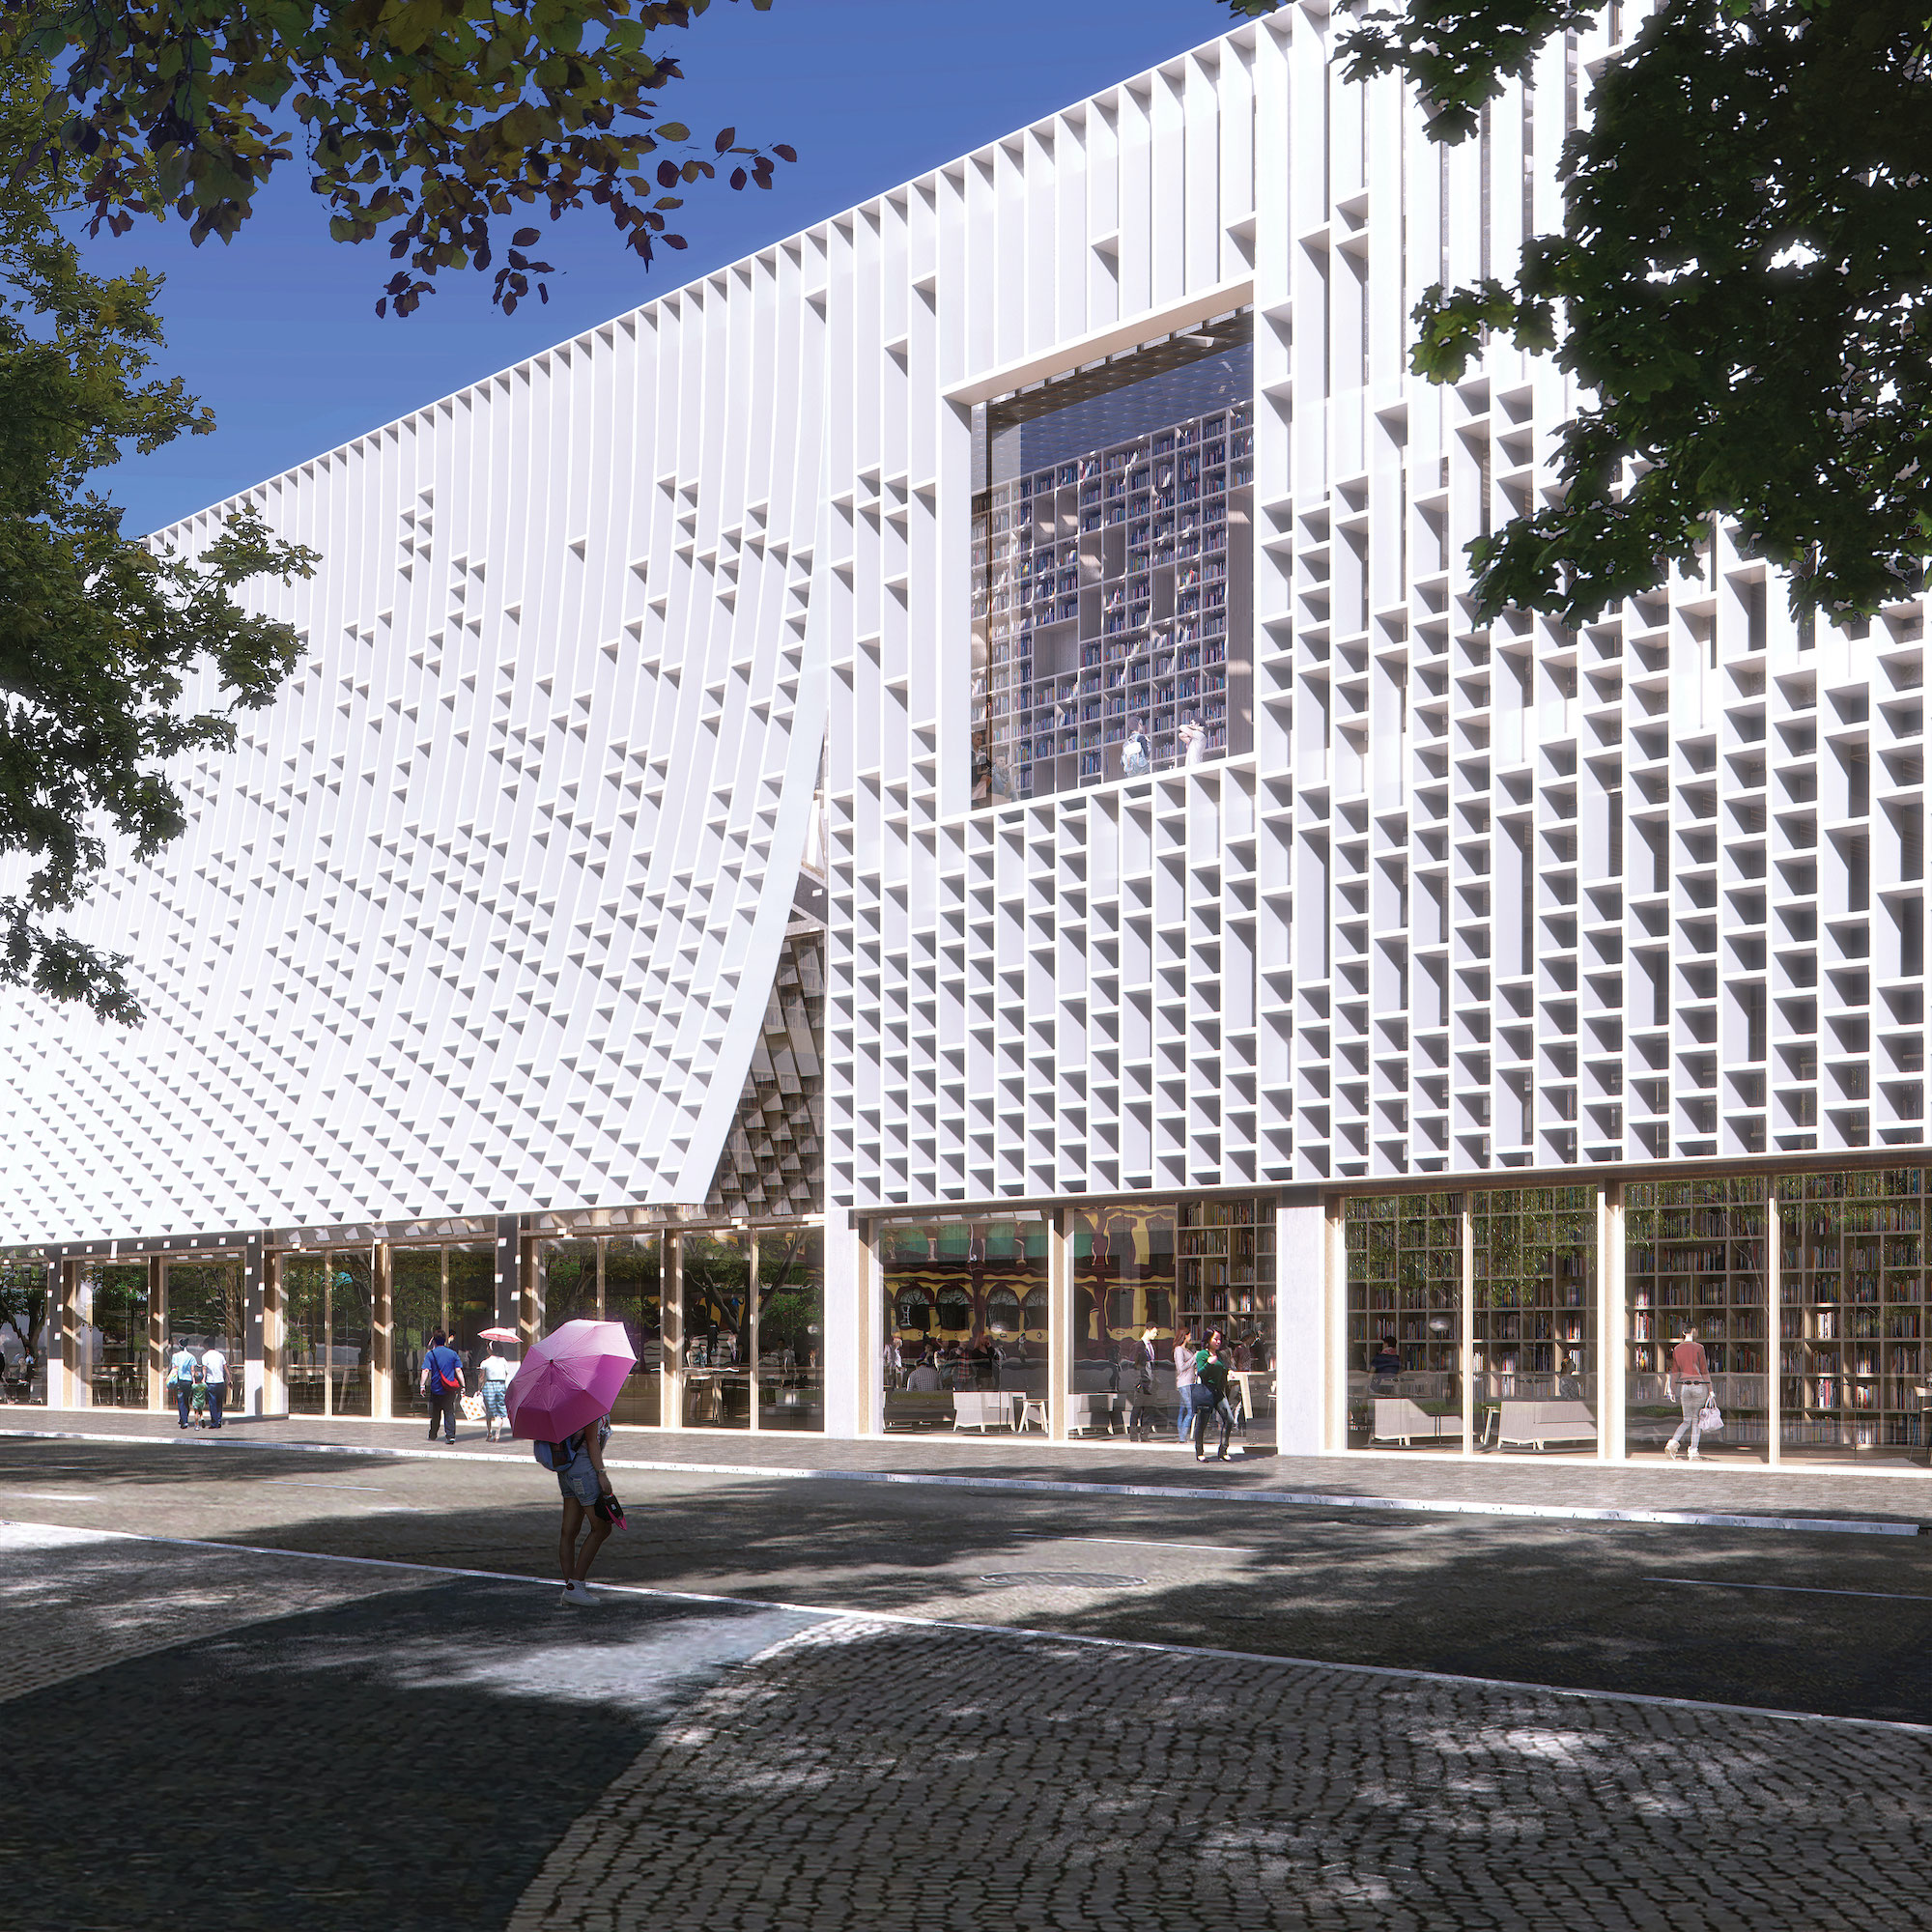 Artist rendering of the new Central Library's ‘open-book’ façade